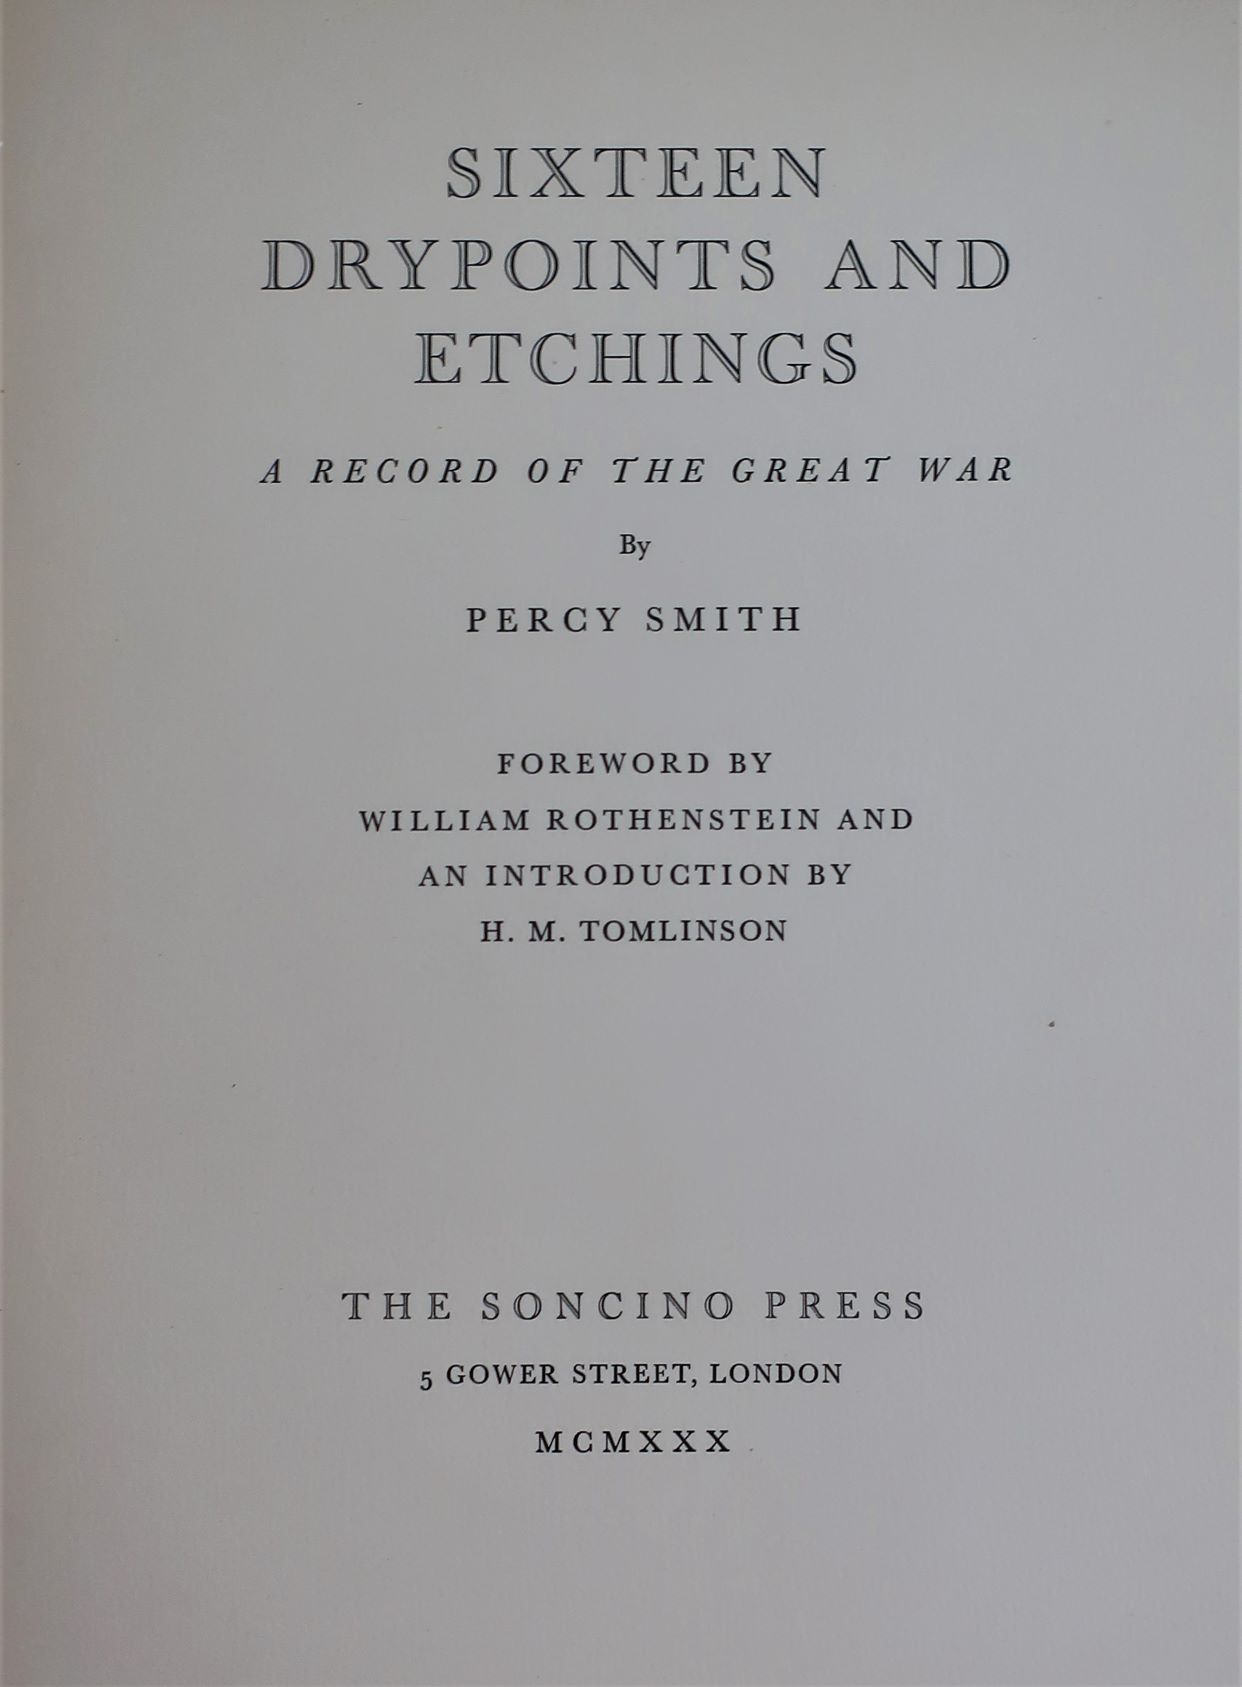 Interior title page of "Sixteen drypoints and etchings", by Percy Smith.